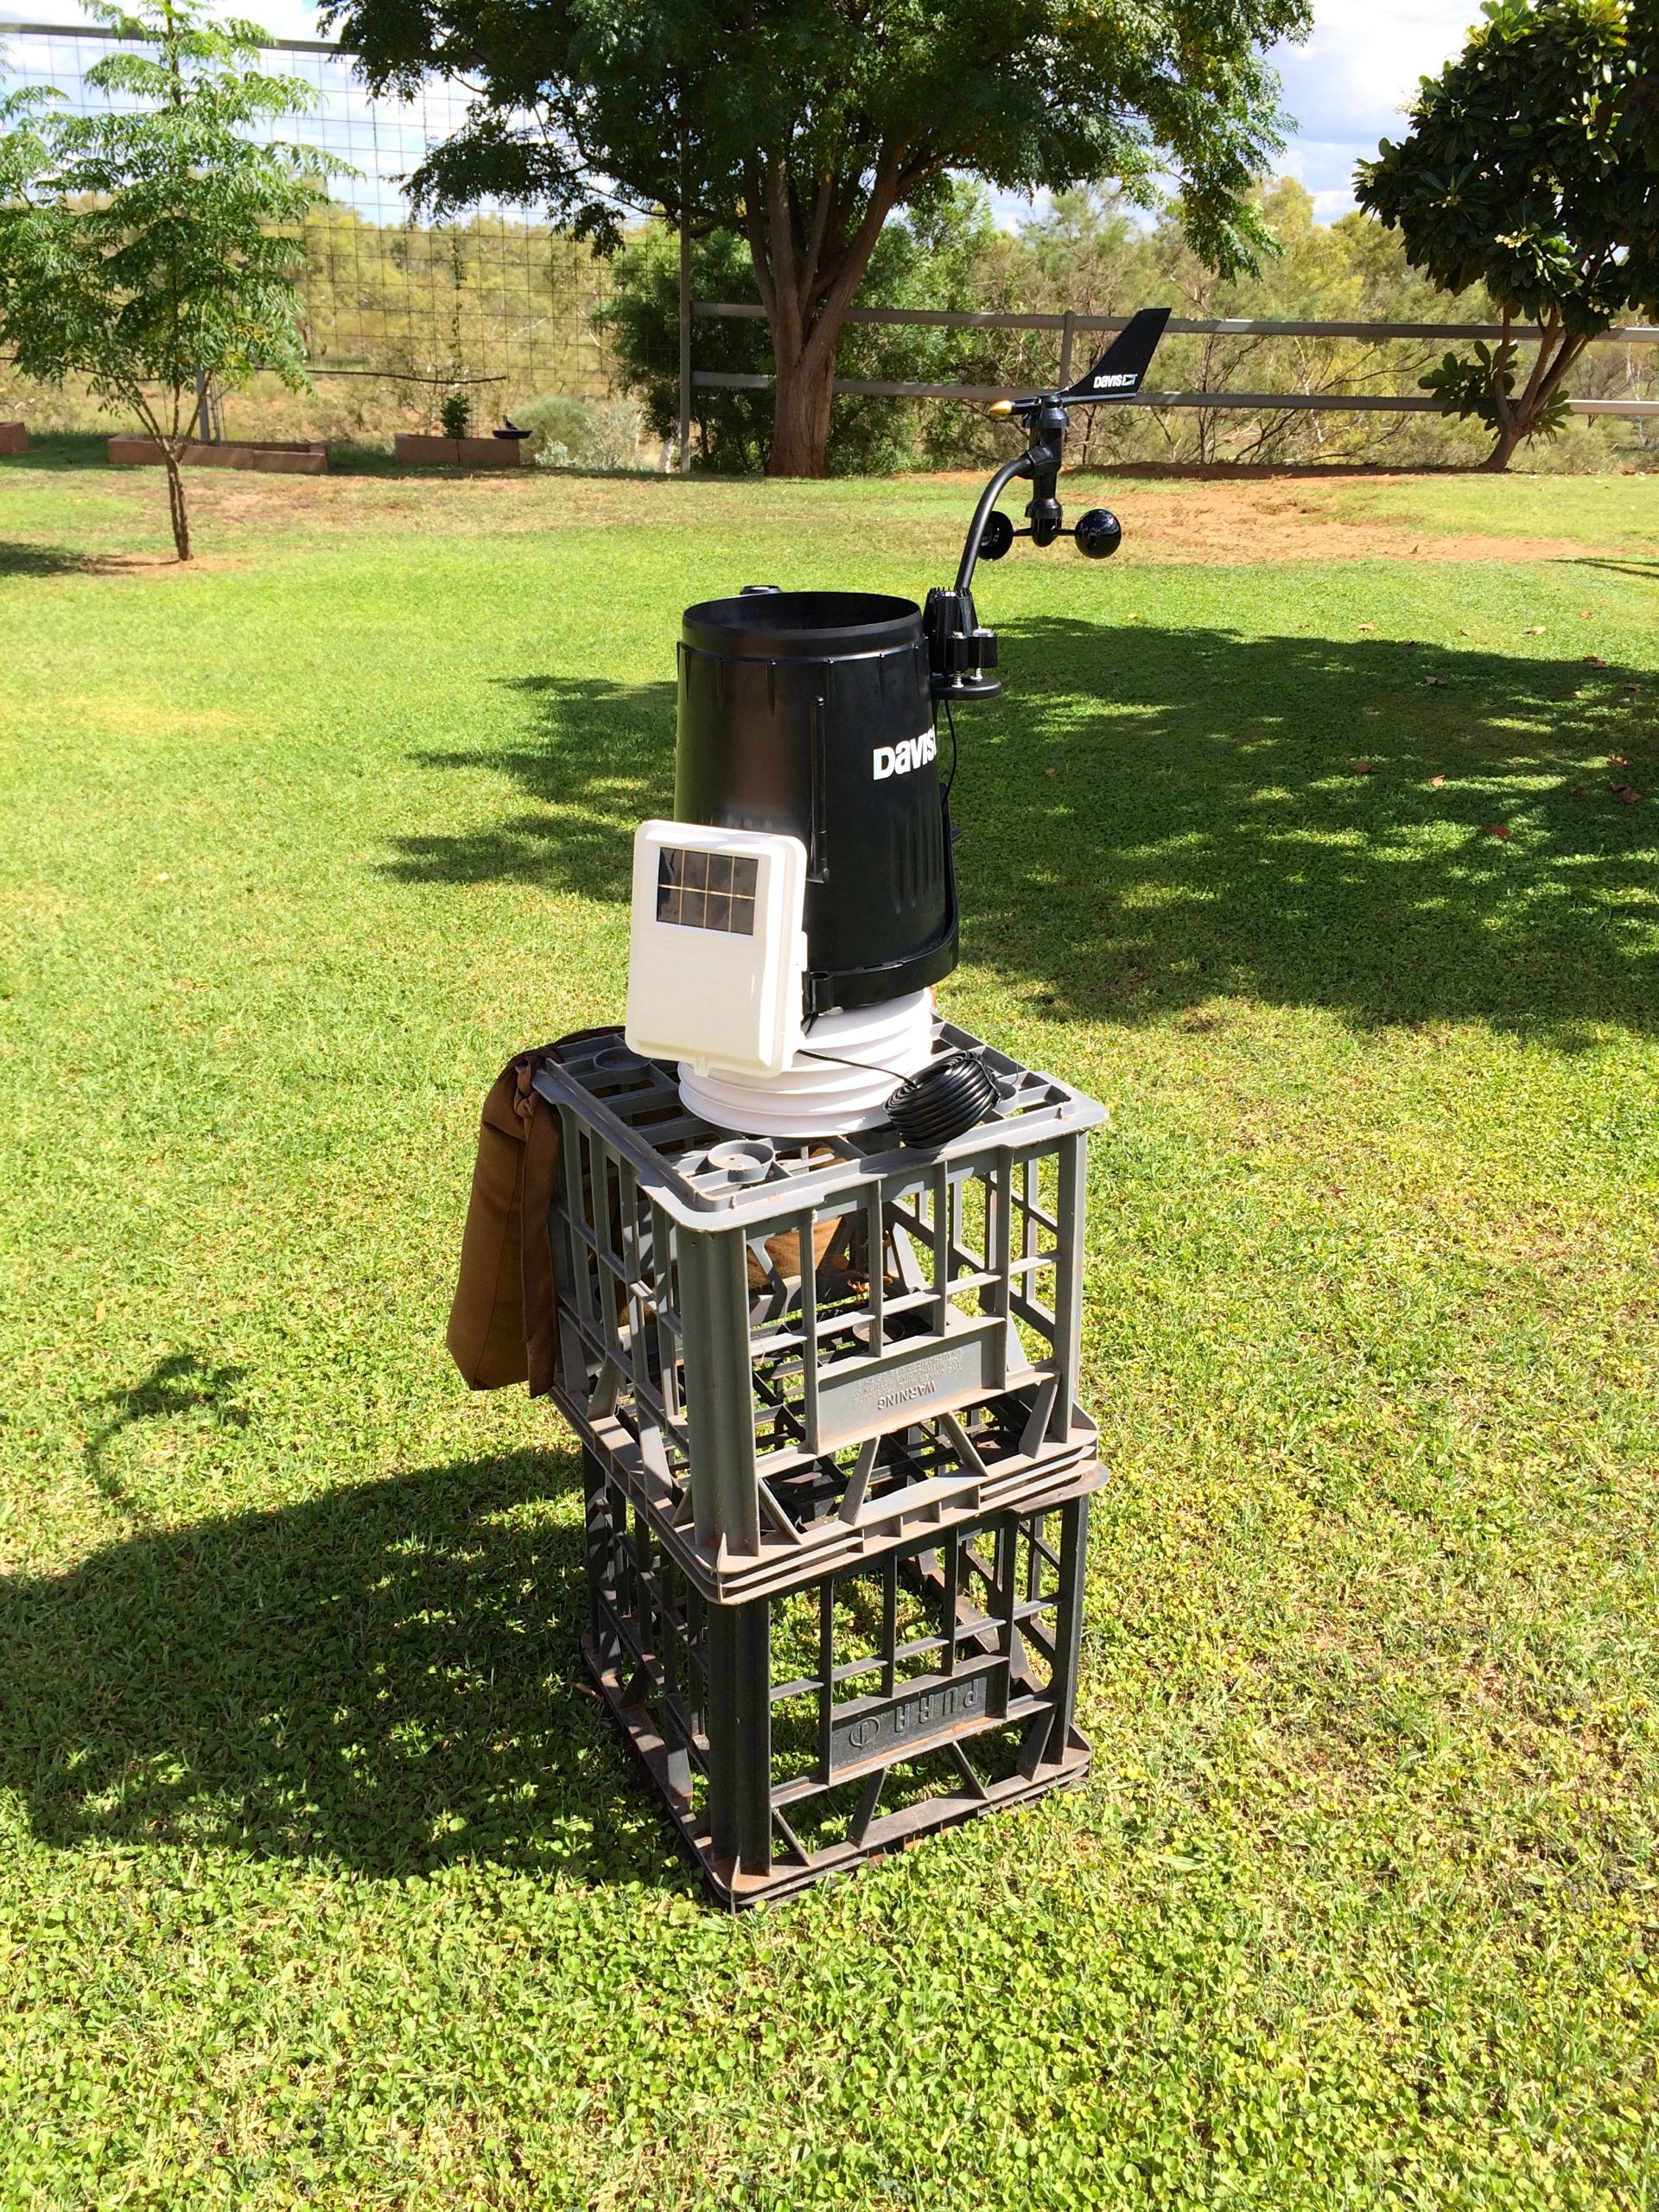 Outdoor testing of Davis Weather station